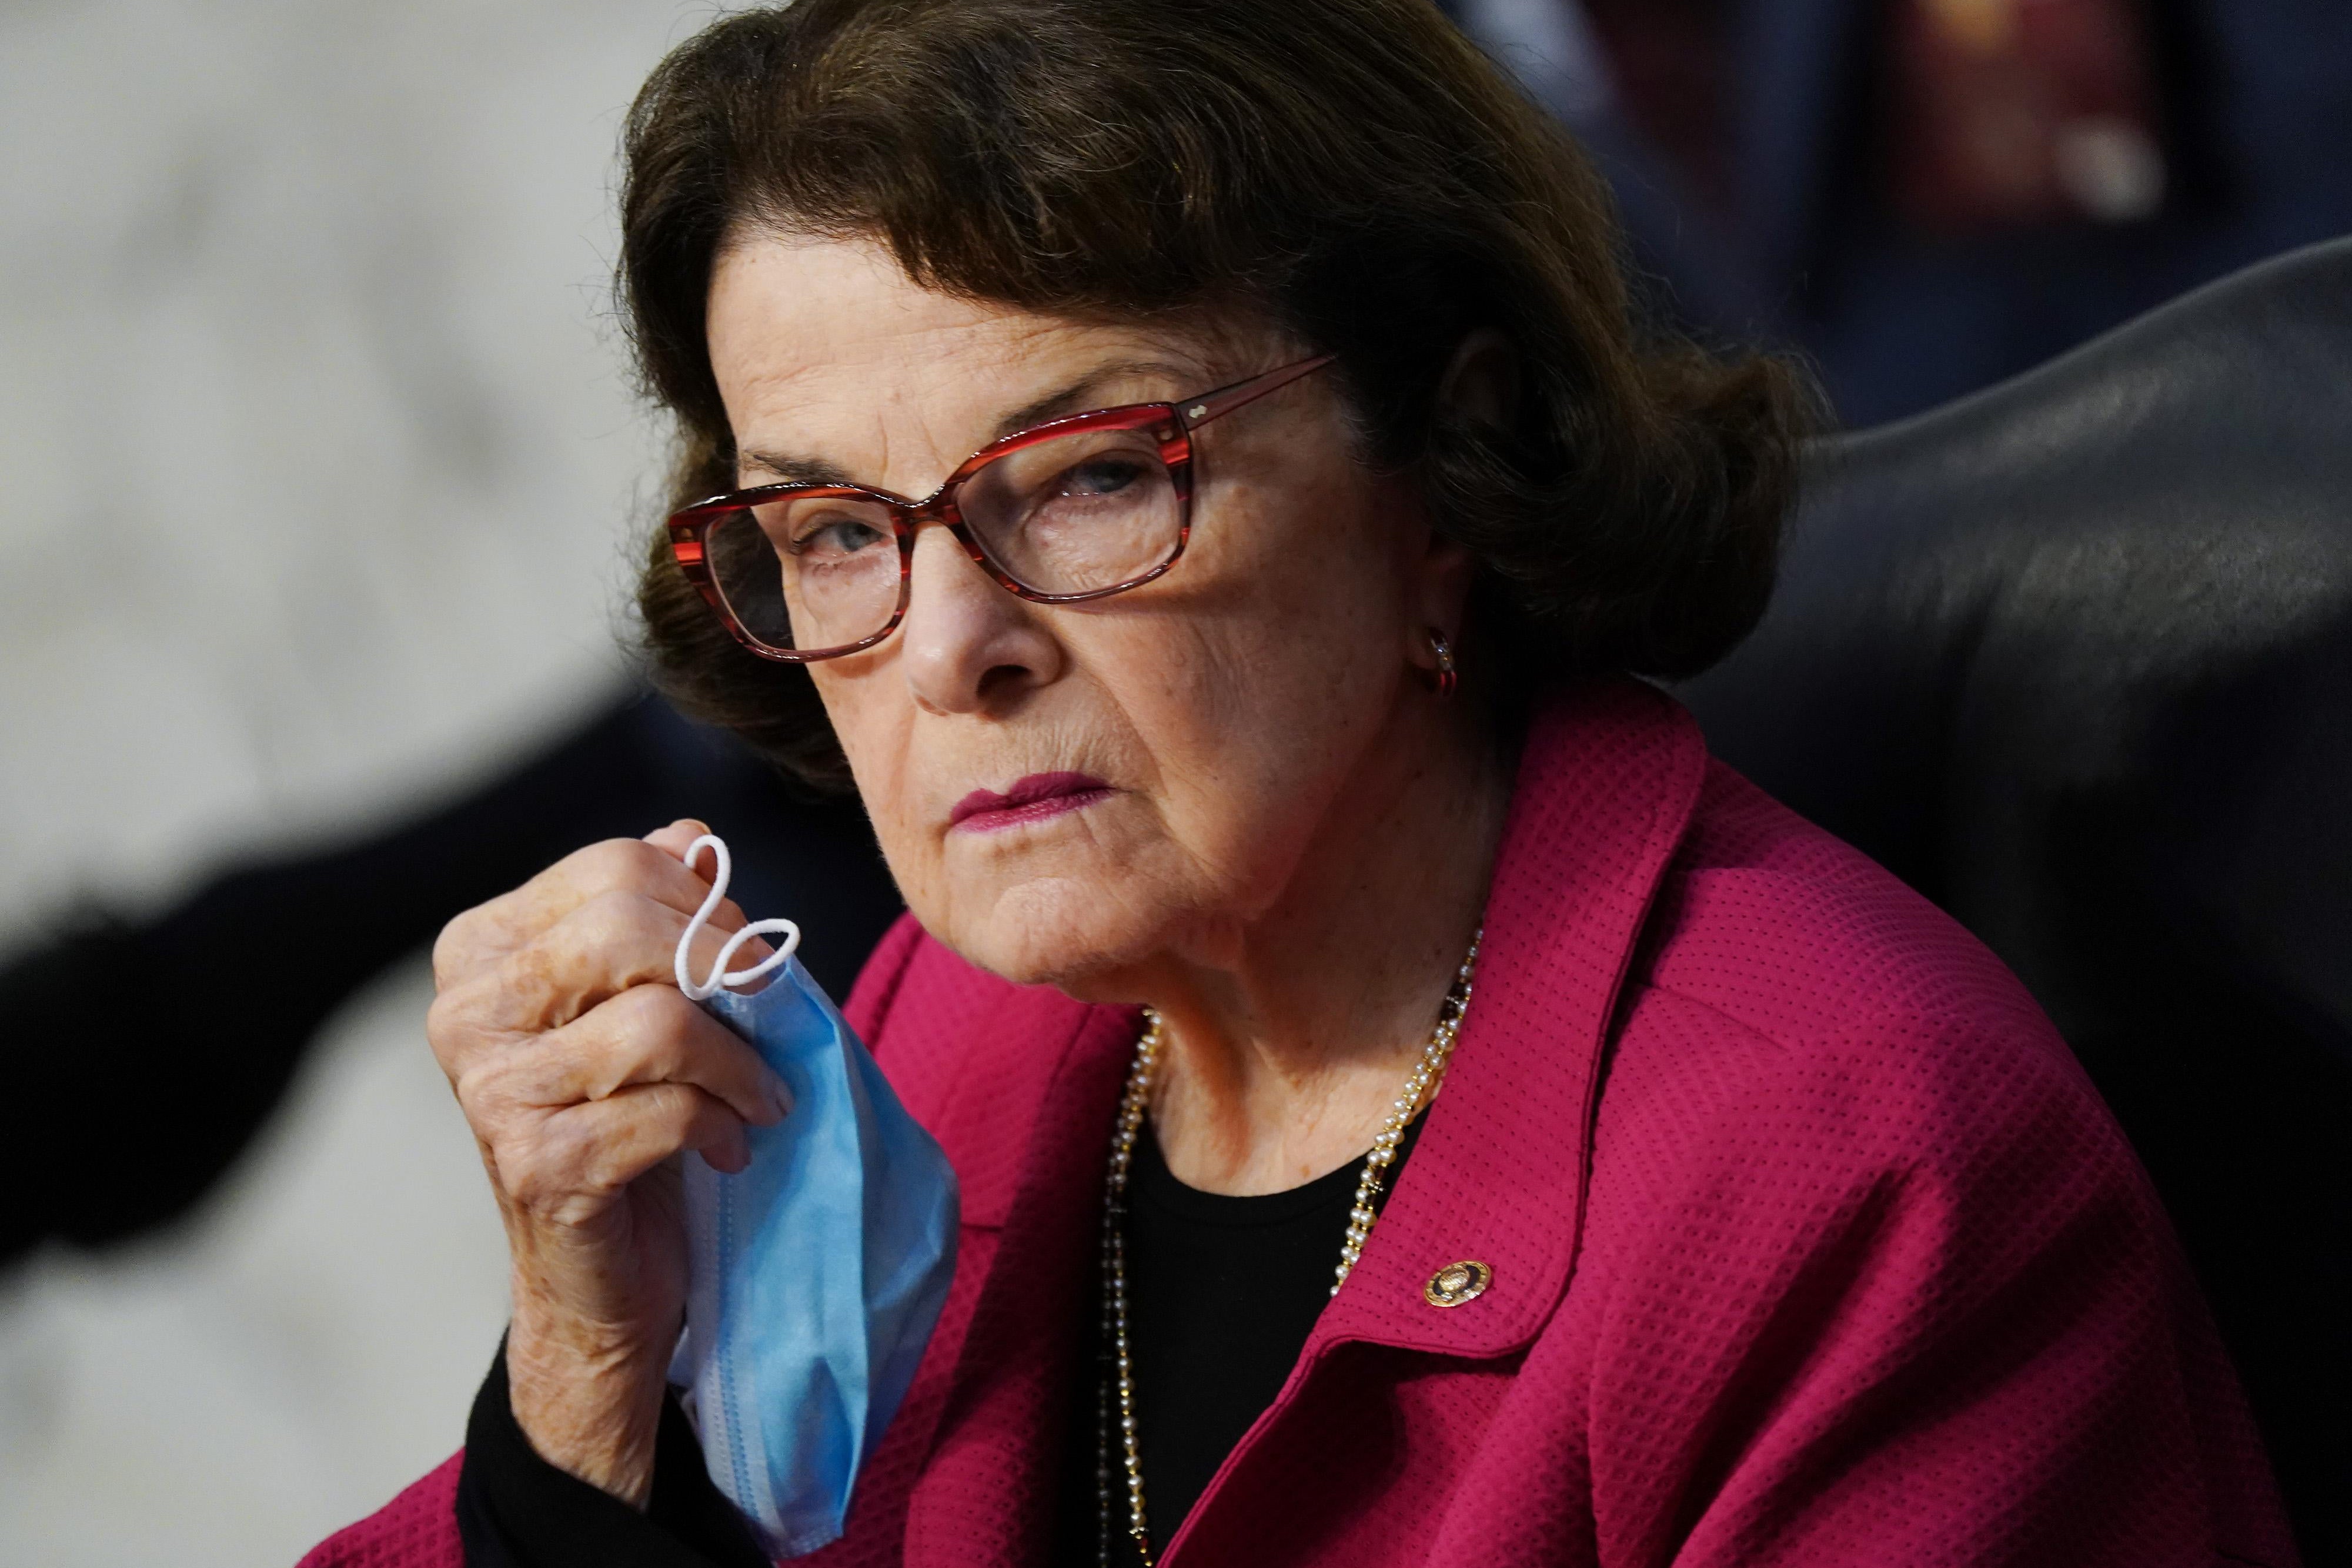 Dianne Feinstein holds a face mask and looks angrily to the side.